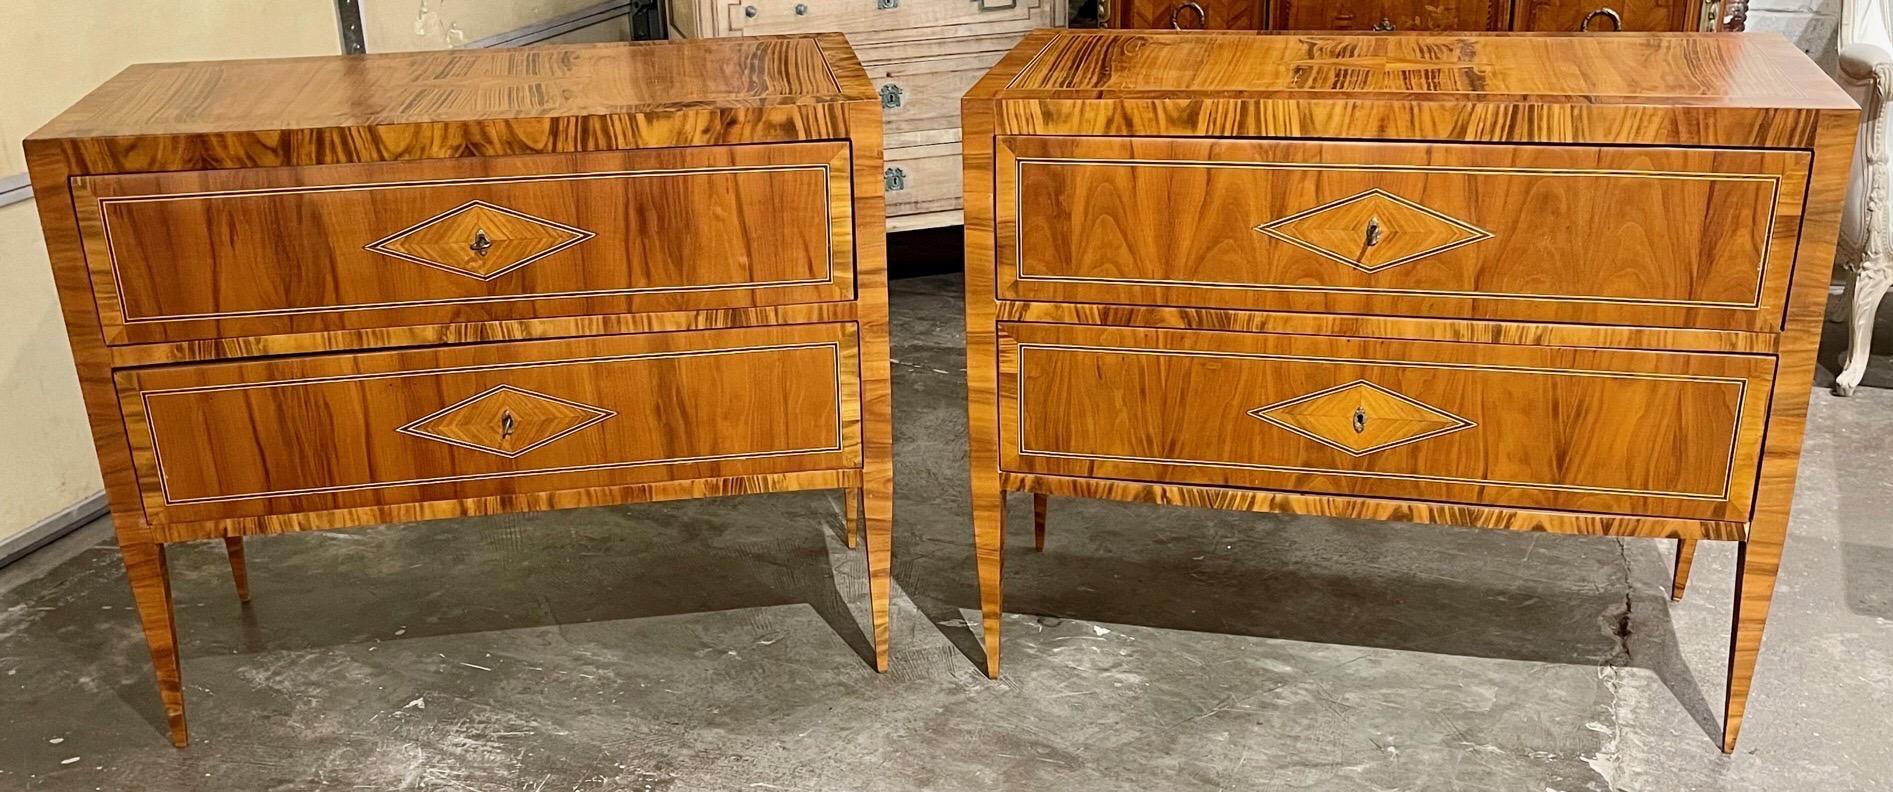 Handsome pair of Italian exotic veneer commodes inlaid with inlaid diamond pattern. Very fine wood polish and excellent craftsmanship. Superb!